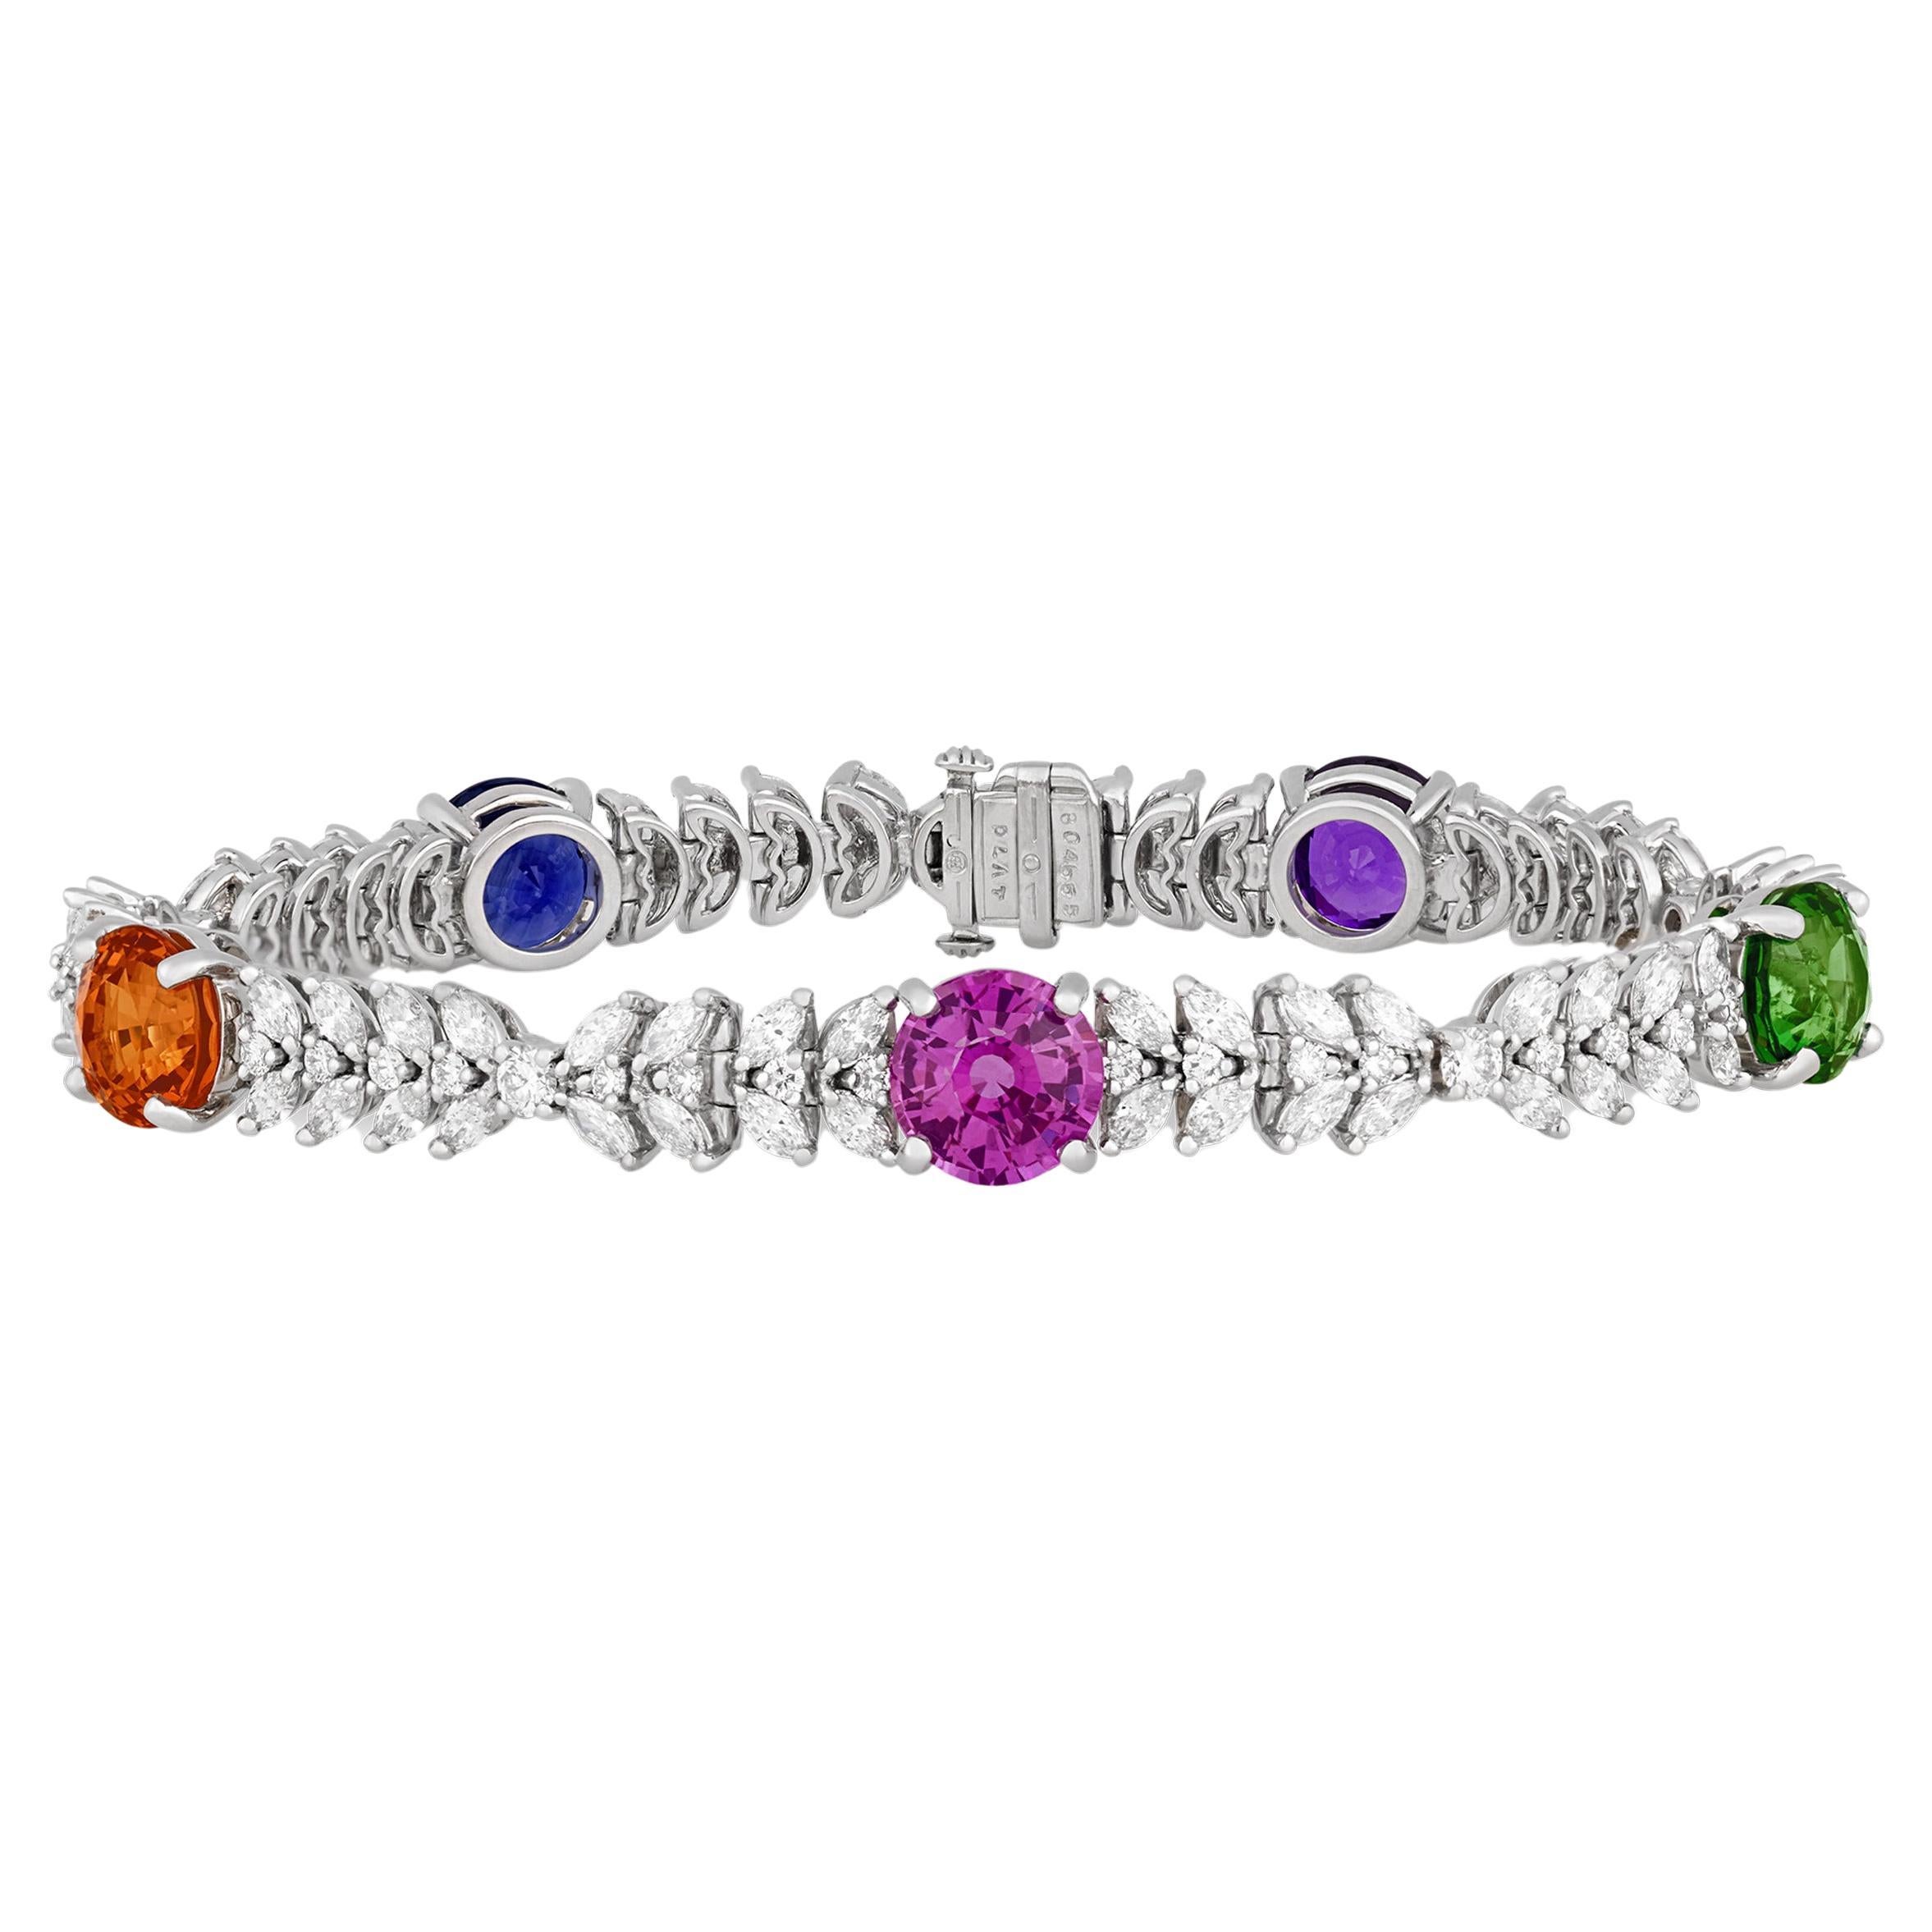 110 Collection Fancy Colored Sapphire and Tsavorite Bracelet, 13.05 Carats